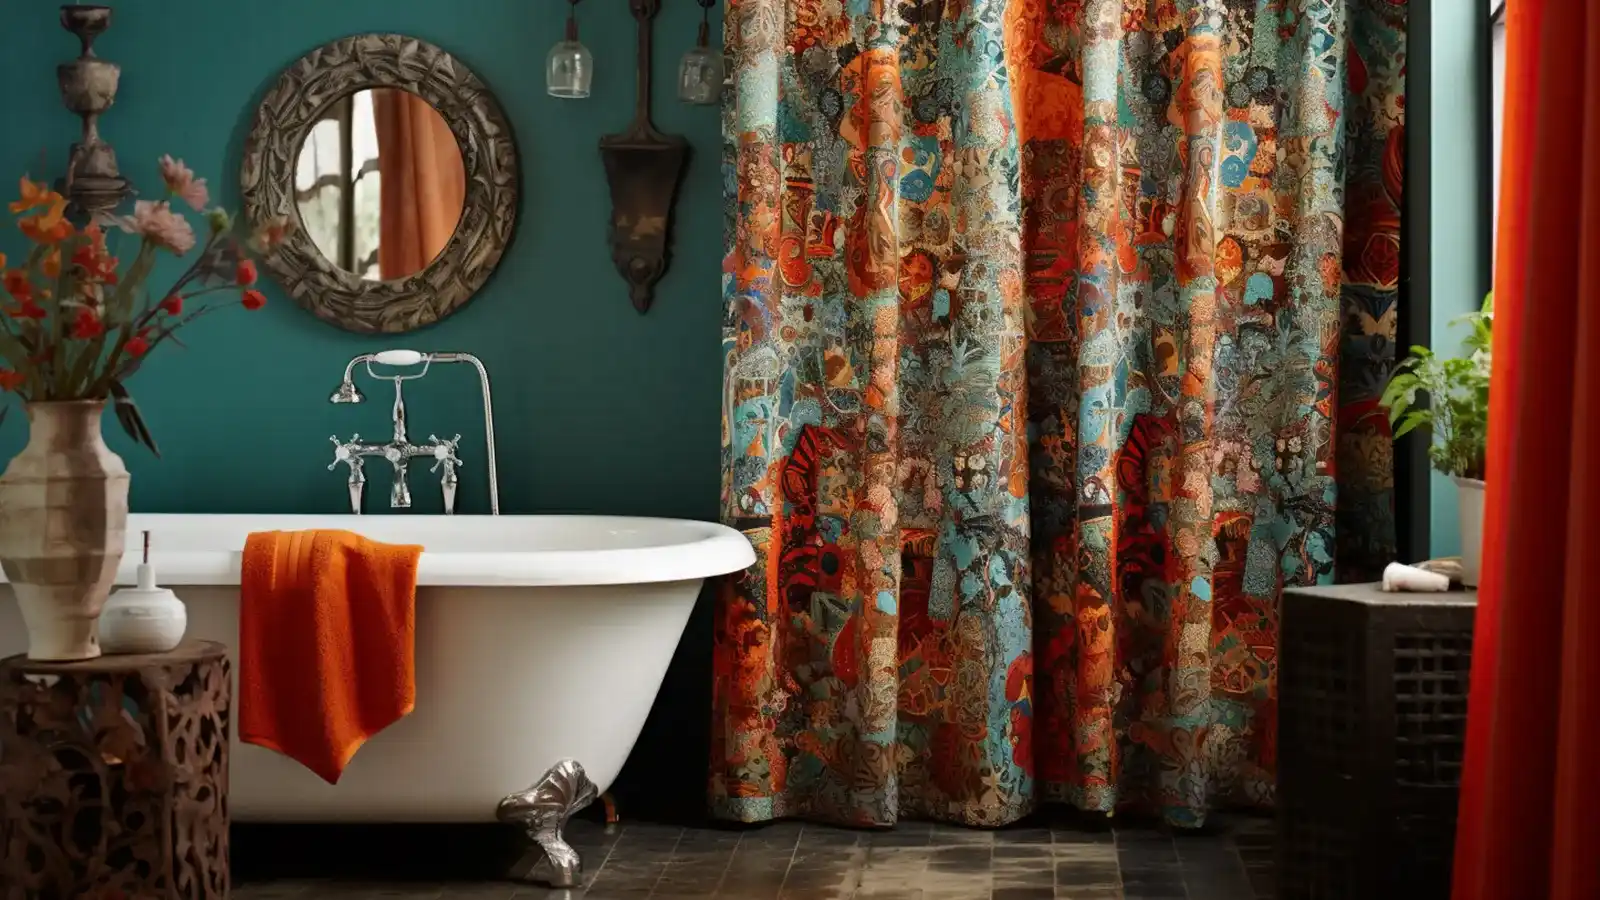 what is a shower curtain made of? A bathroom with an orange and blue shower curtain.